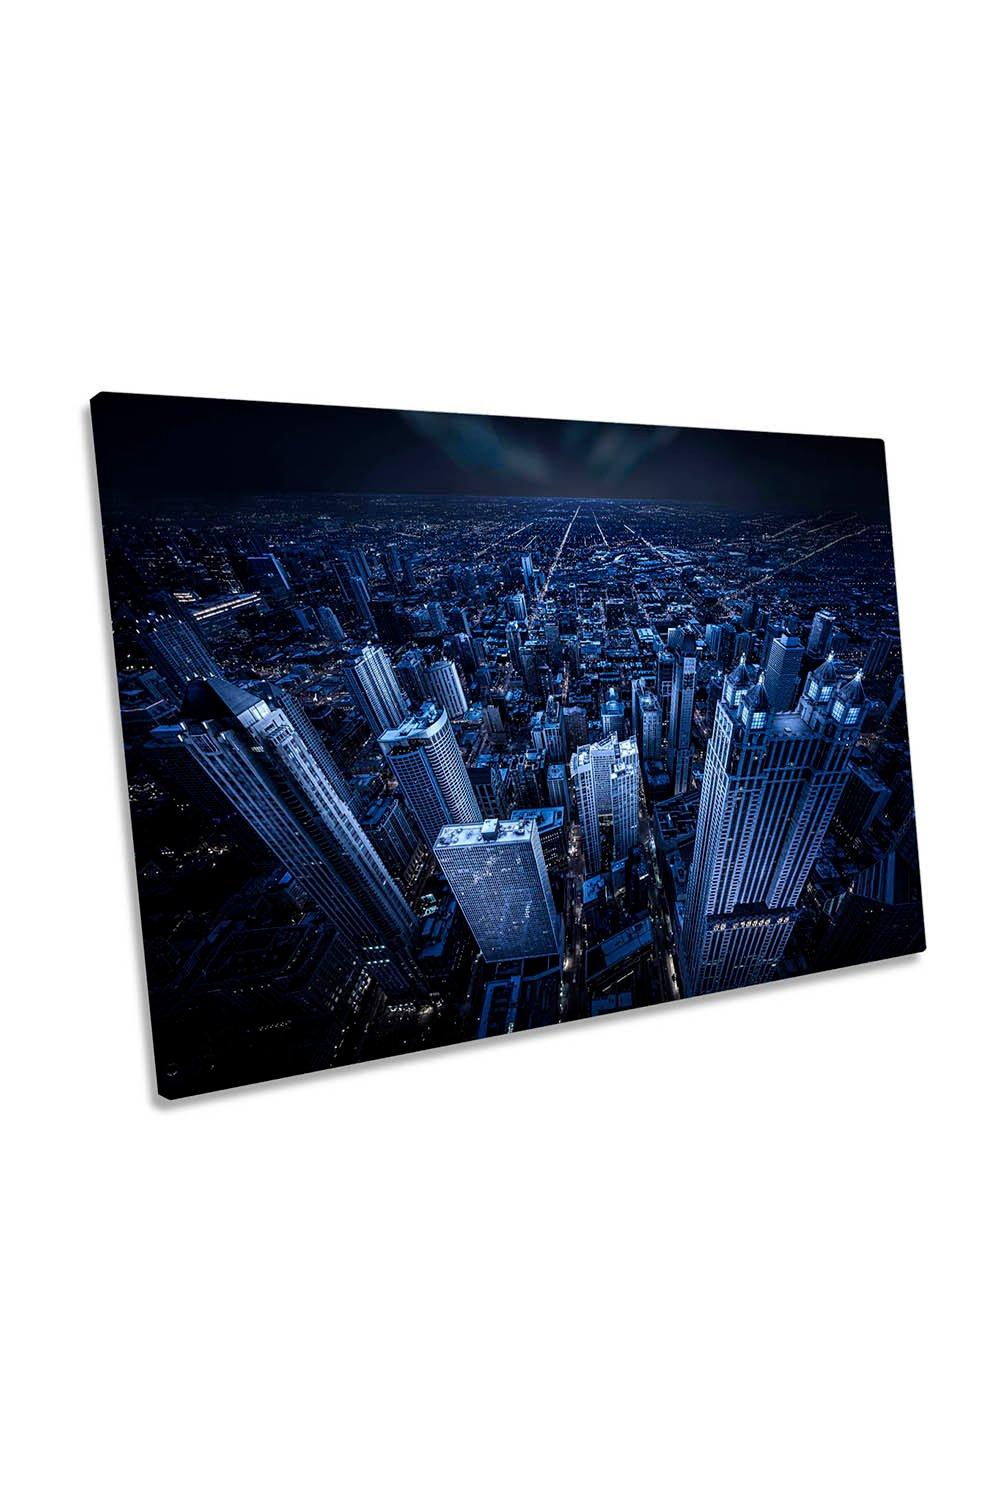 Chicago City Skyline Blue Hour Canvas Wall Art Picture Print